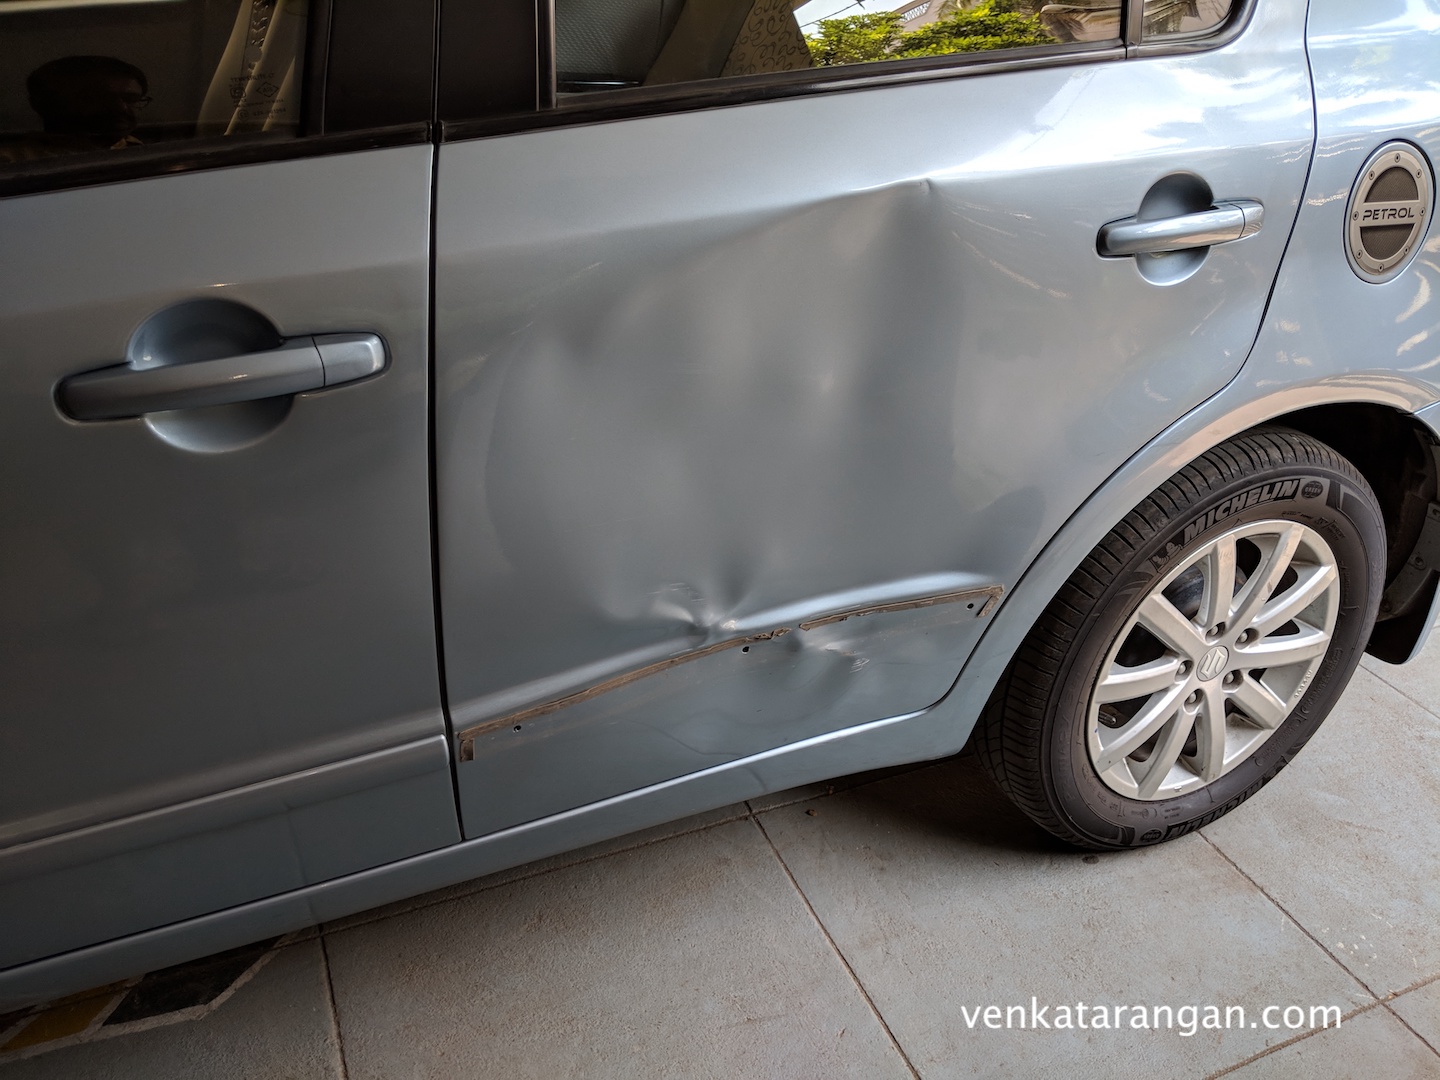 Car door that was damaged while left with valet parking